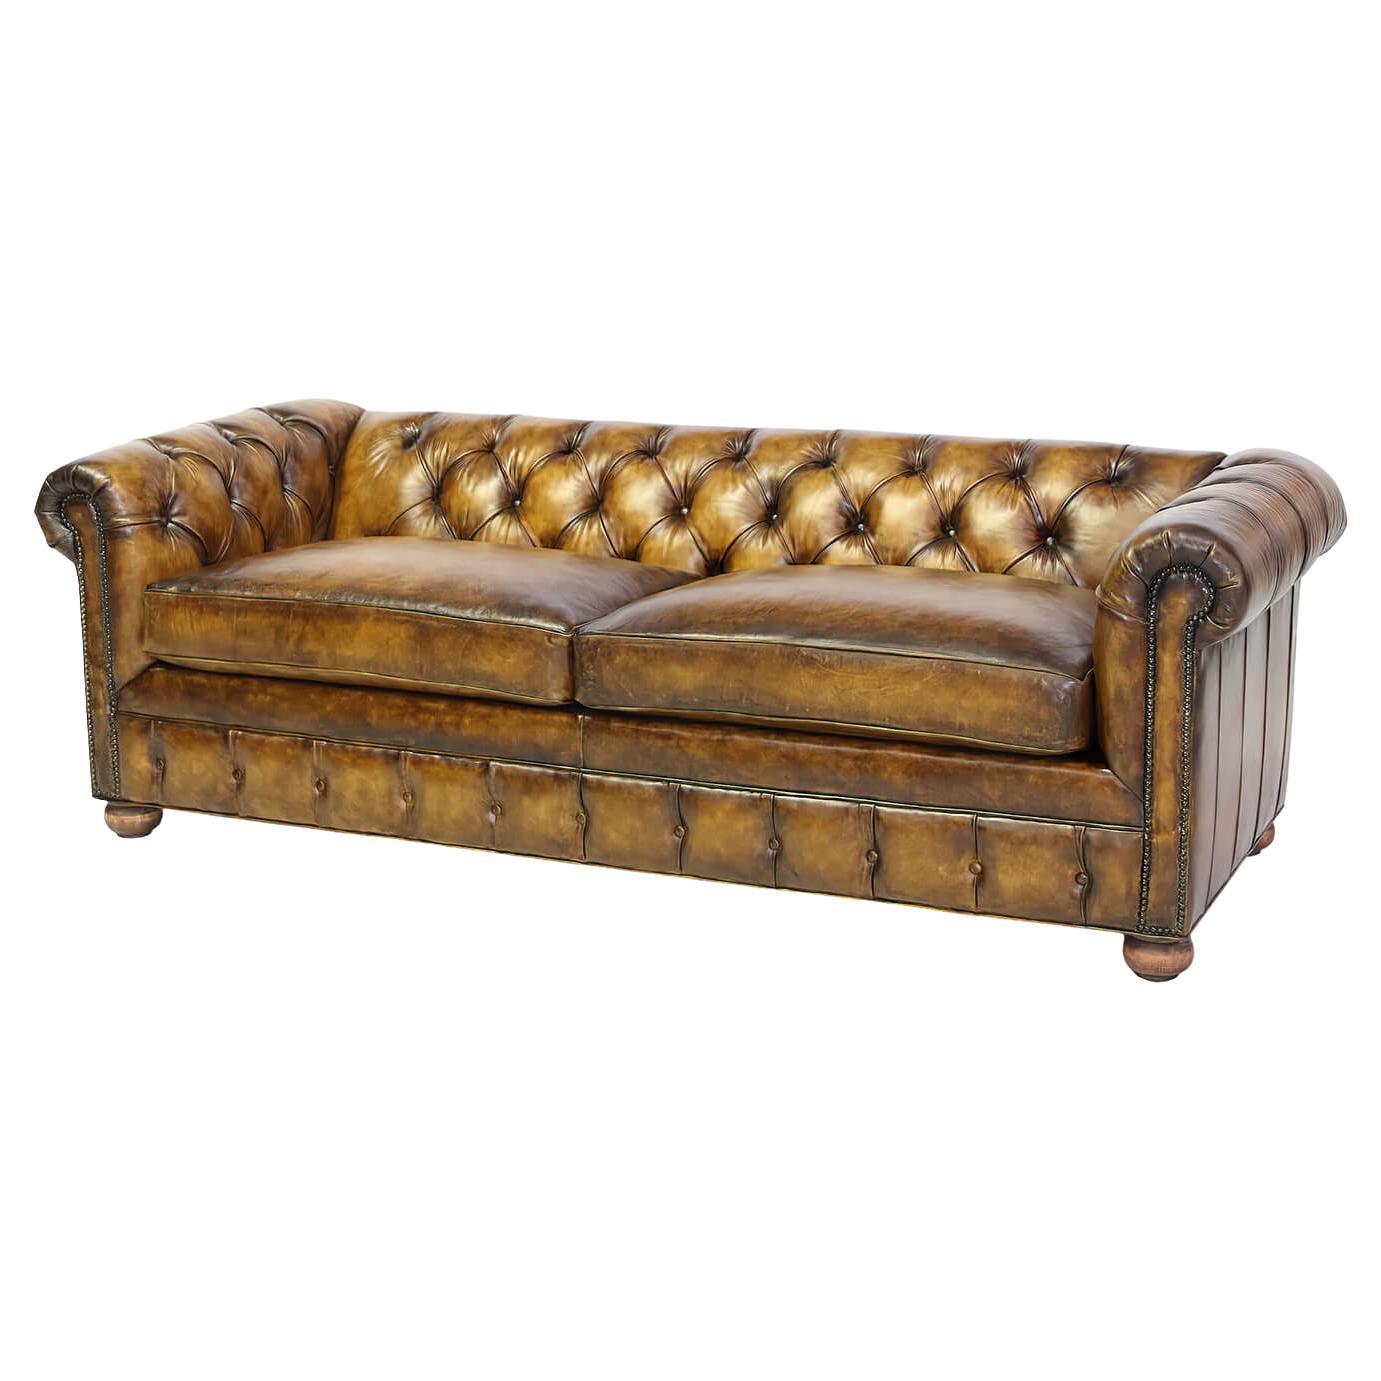 Custom Classic Chesterfield Sofa For Sale at 1stDibs